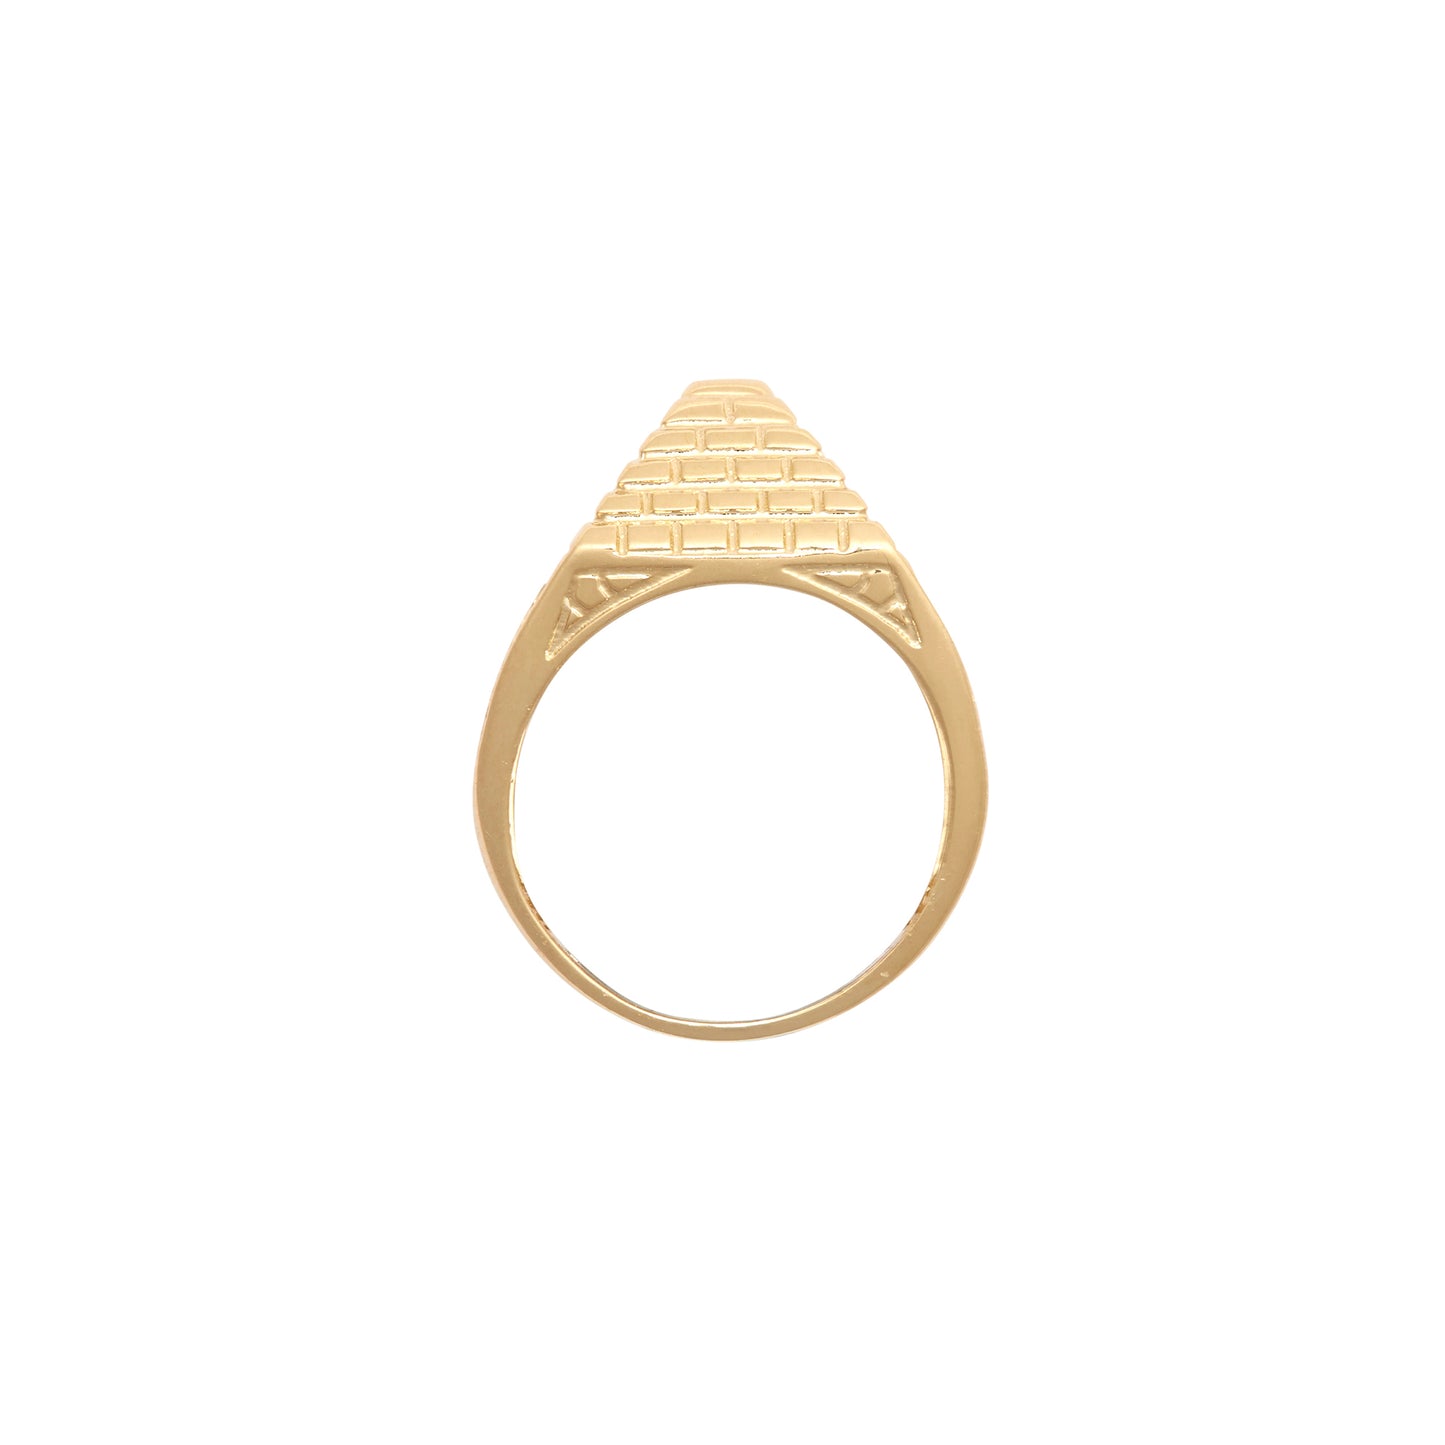 9ct Gold  Egyptian Pyramid 10mm Signet Baby Pinky Ring - JBR035